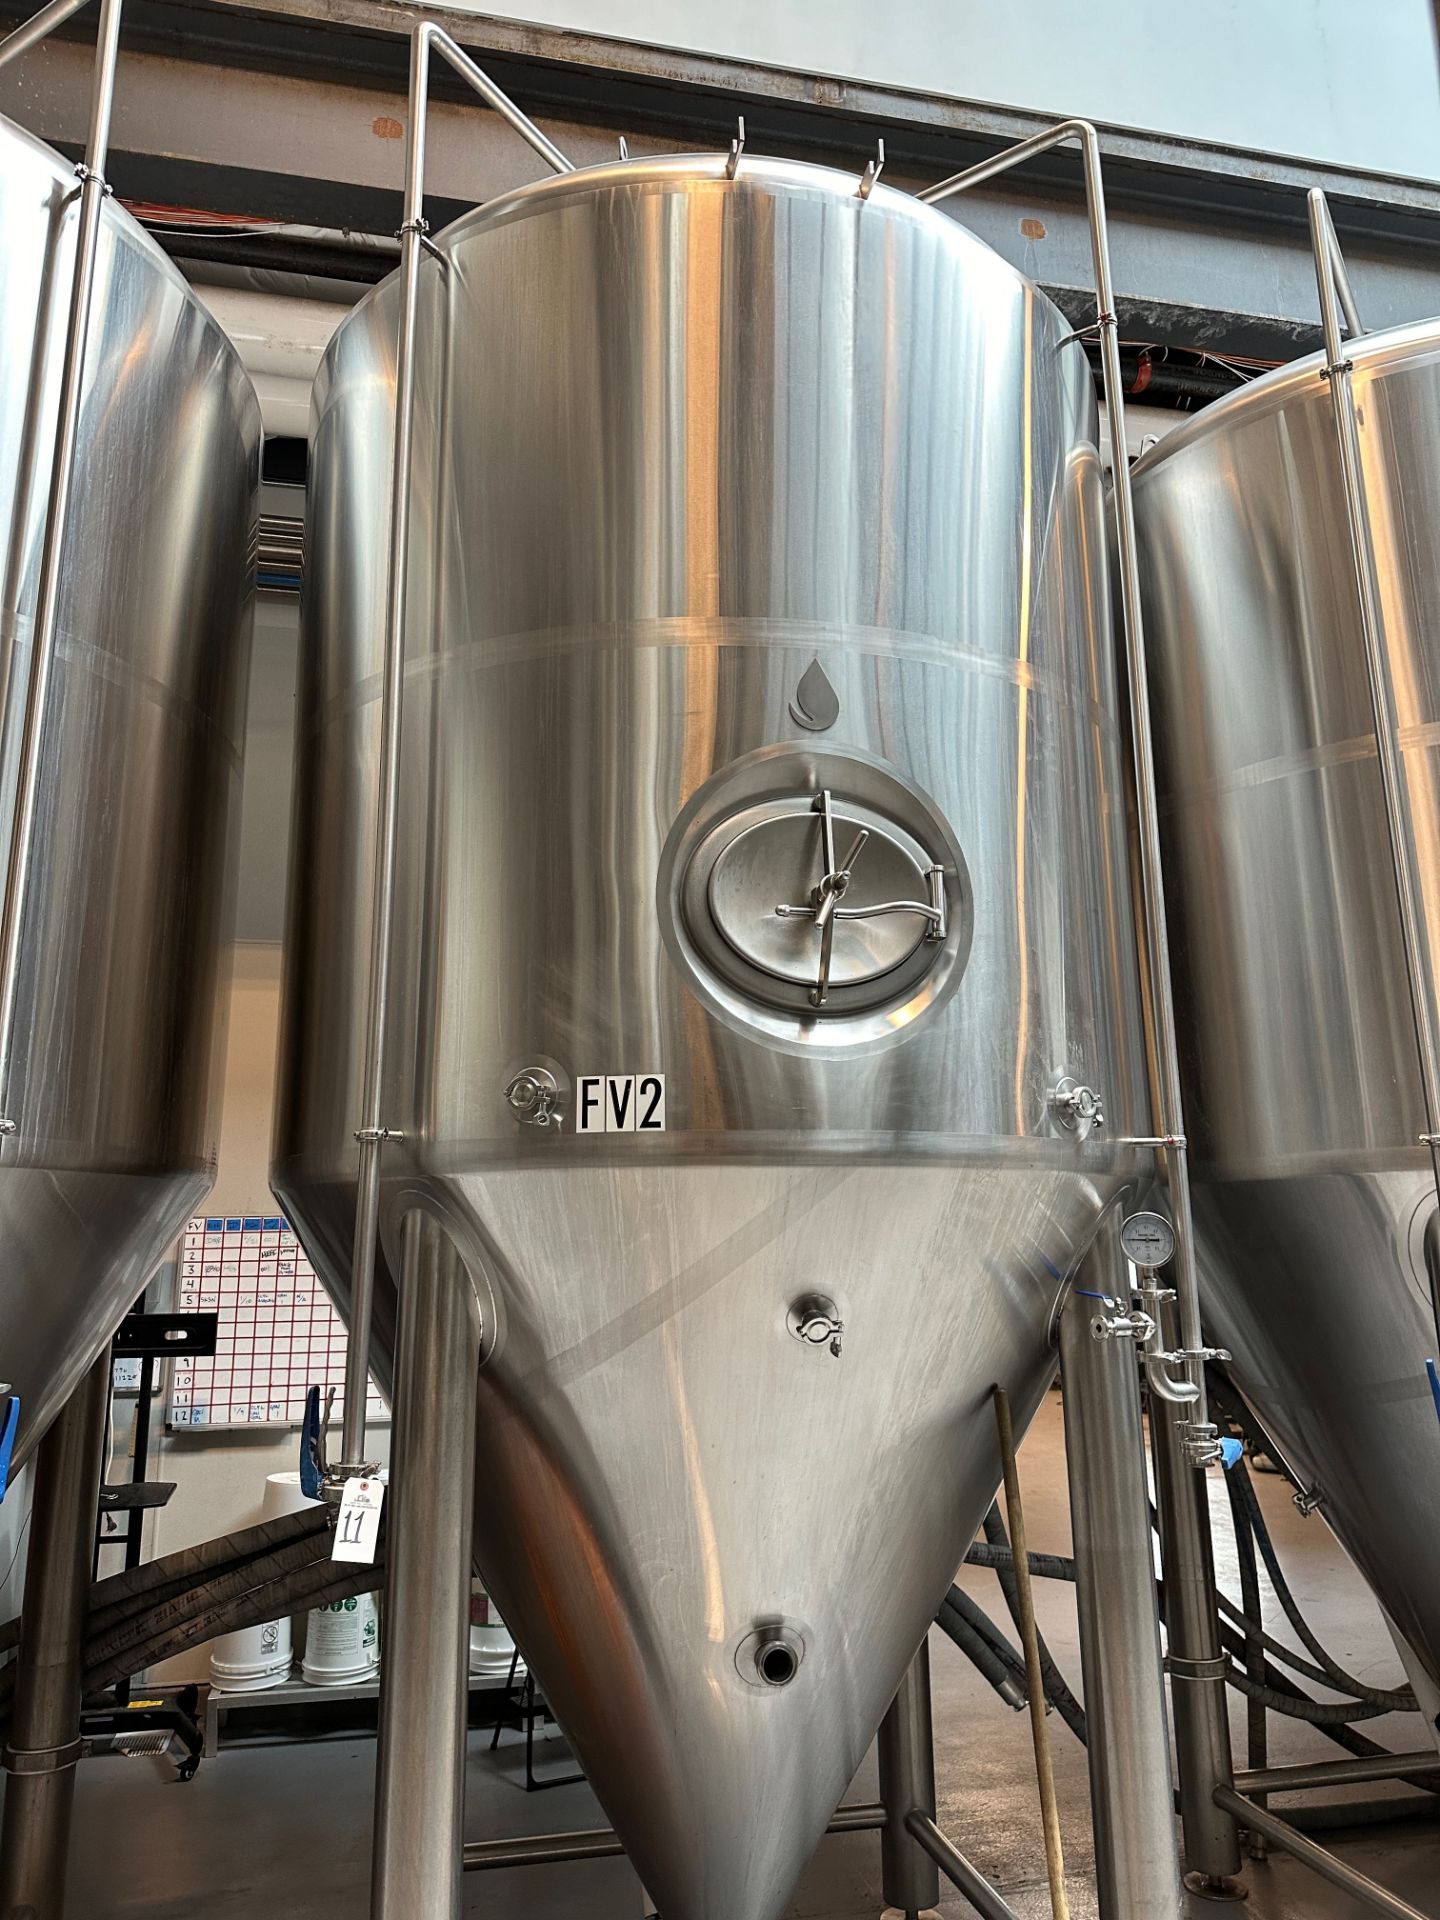 Complete 40 BBL Microbrewery - 40 BBL Deutsche 4-Vessel Brewhouse, Tanks, Can Line - See Description - Image 35 of 335